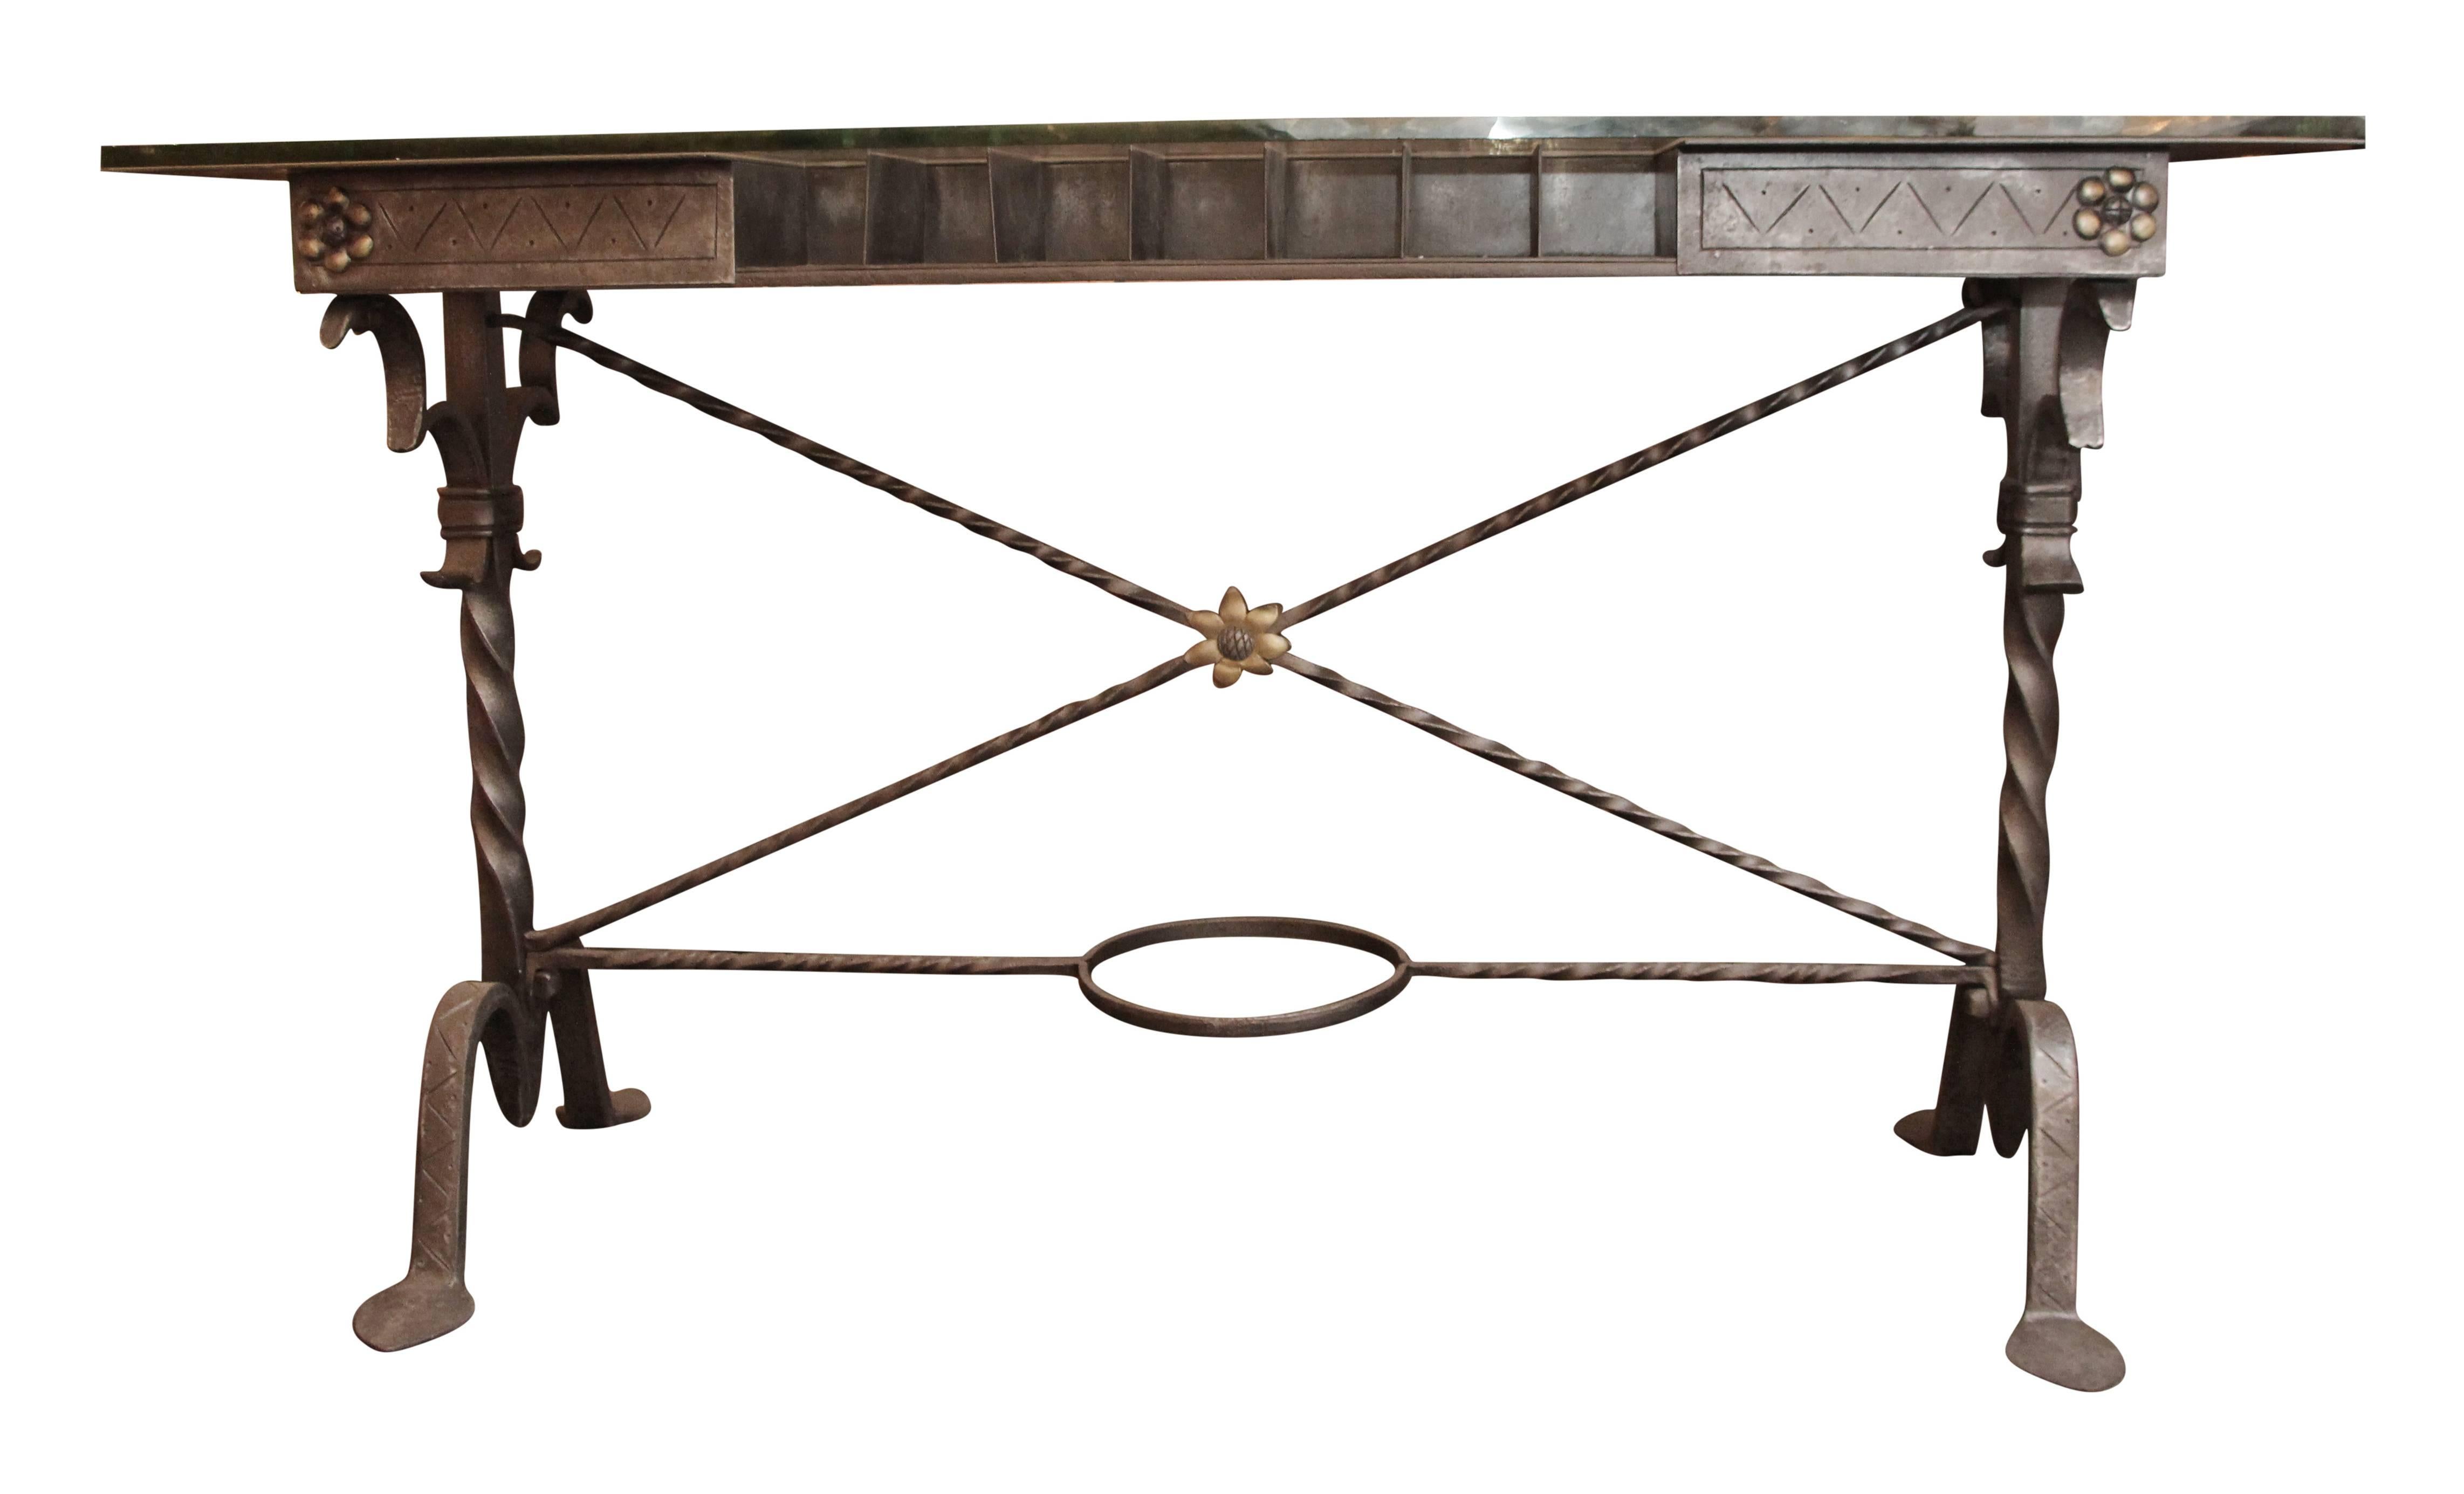 Samuel Yellin (1884-1940) was one of the foremost, if not the foremost, American master blacksmith and metal designer of the early 20th century. This hand-forged intricately 1920s hand wrought iron table is put together by bands and pins without any